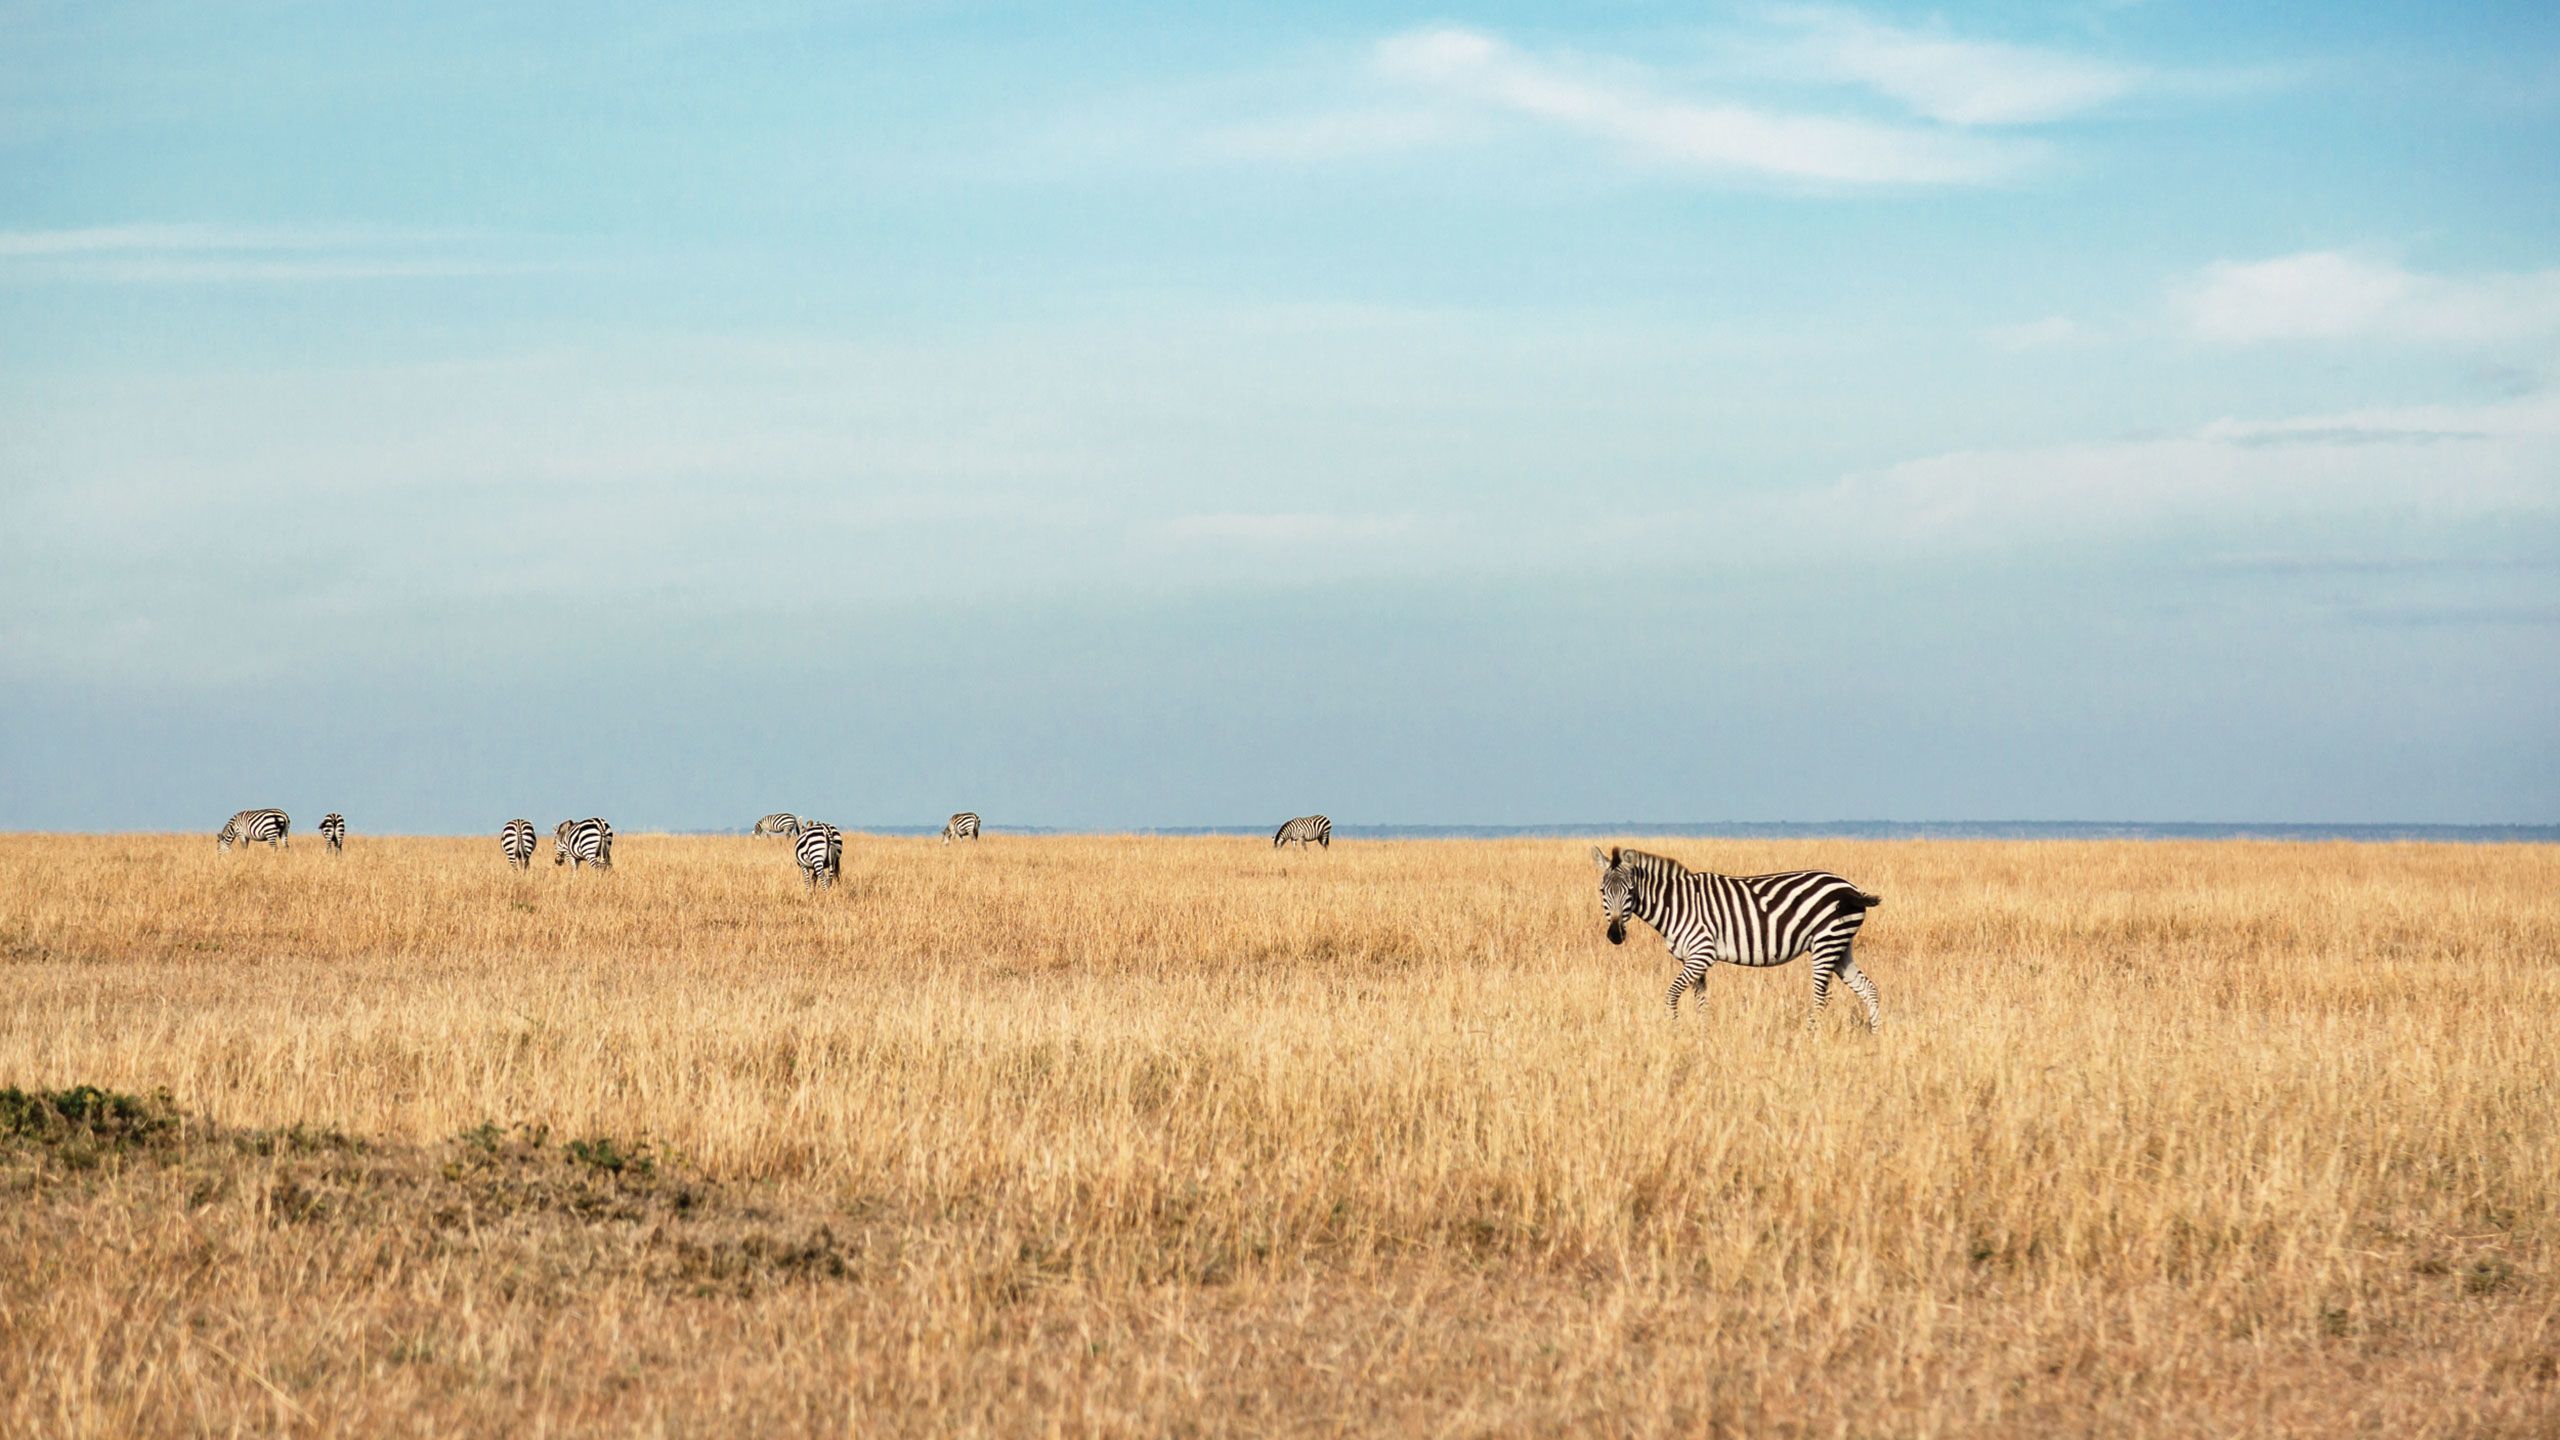 Zebras in the Masai Mara National Reserve during a game drive with the Fairmont Mara Safari Club. Photo by Susan Portnoy